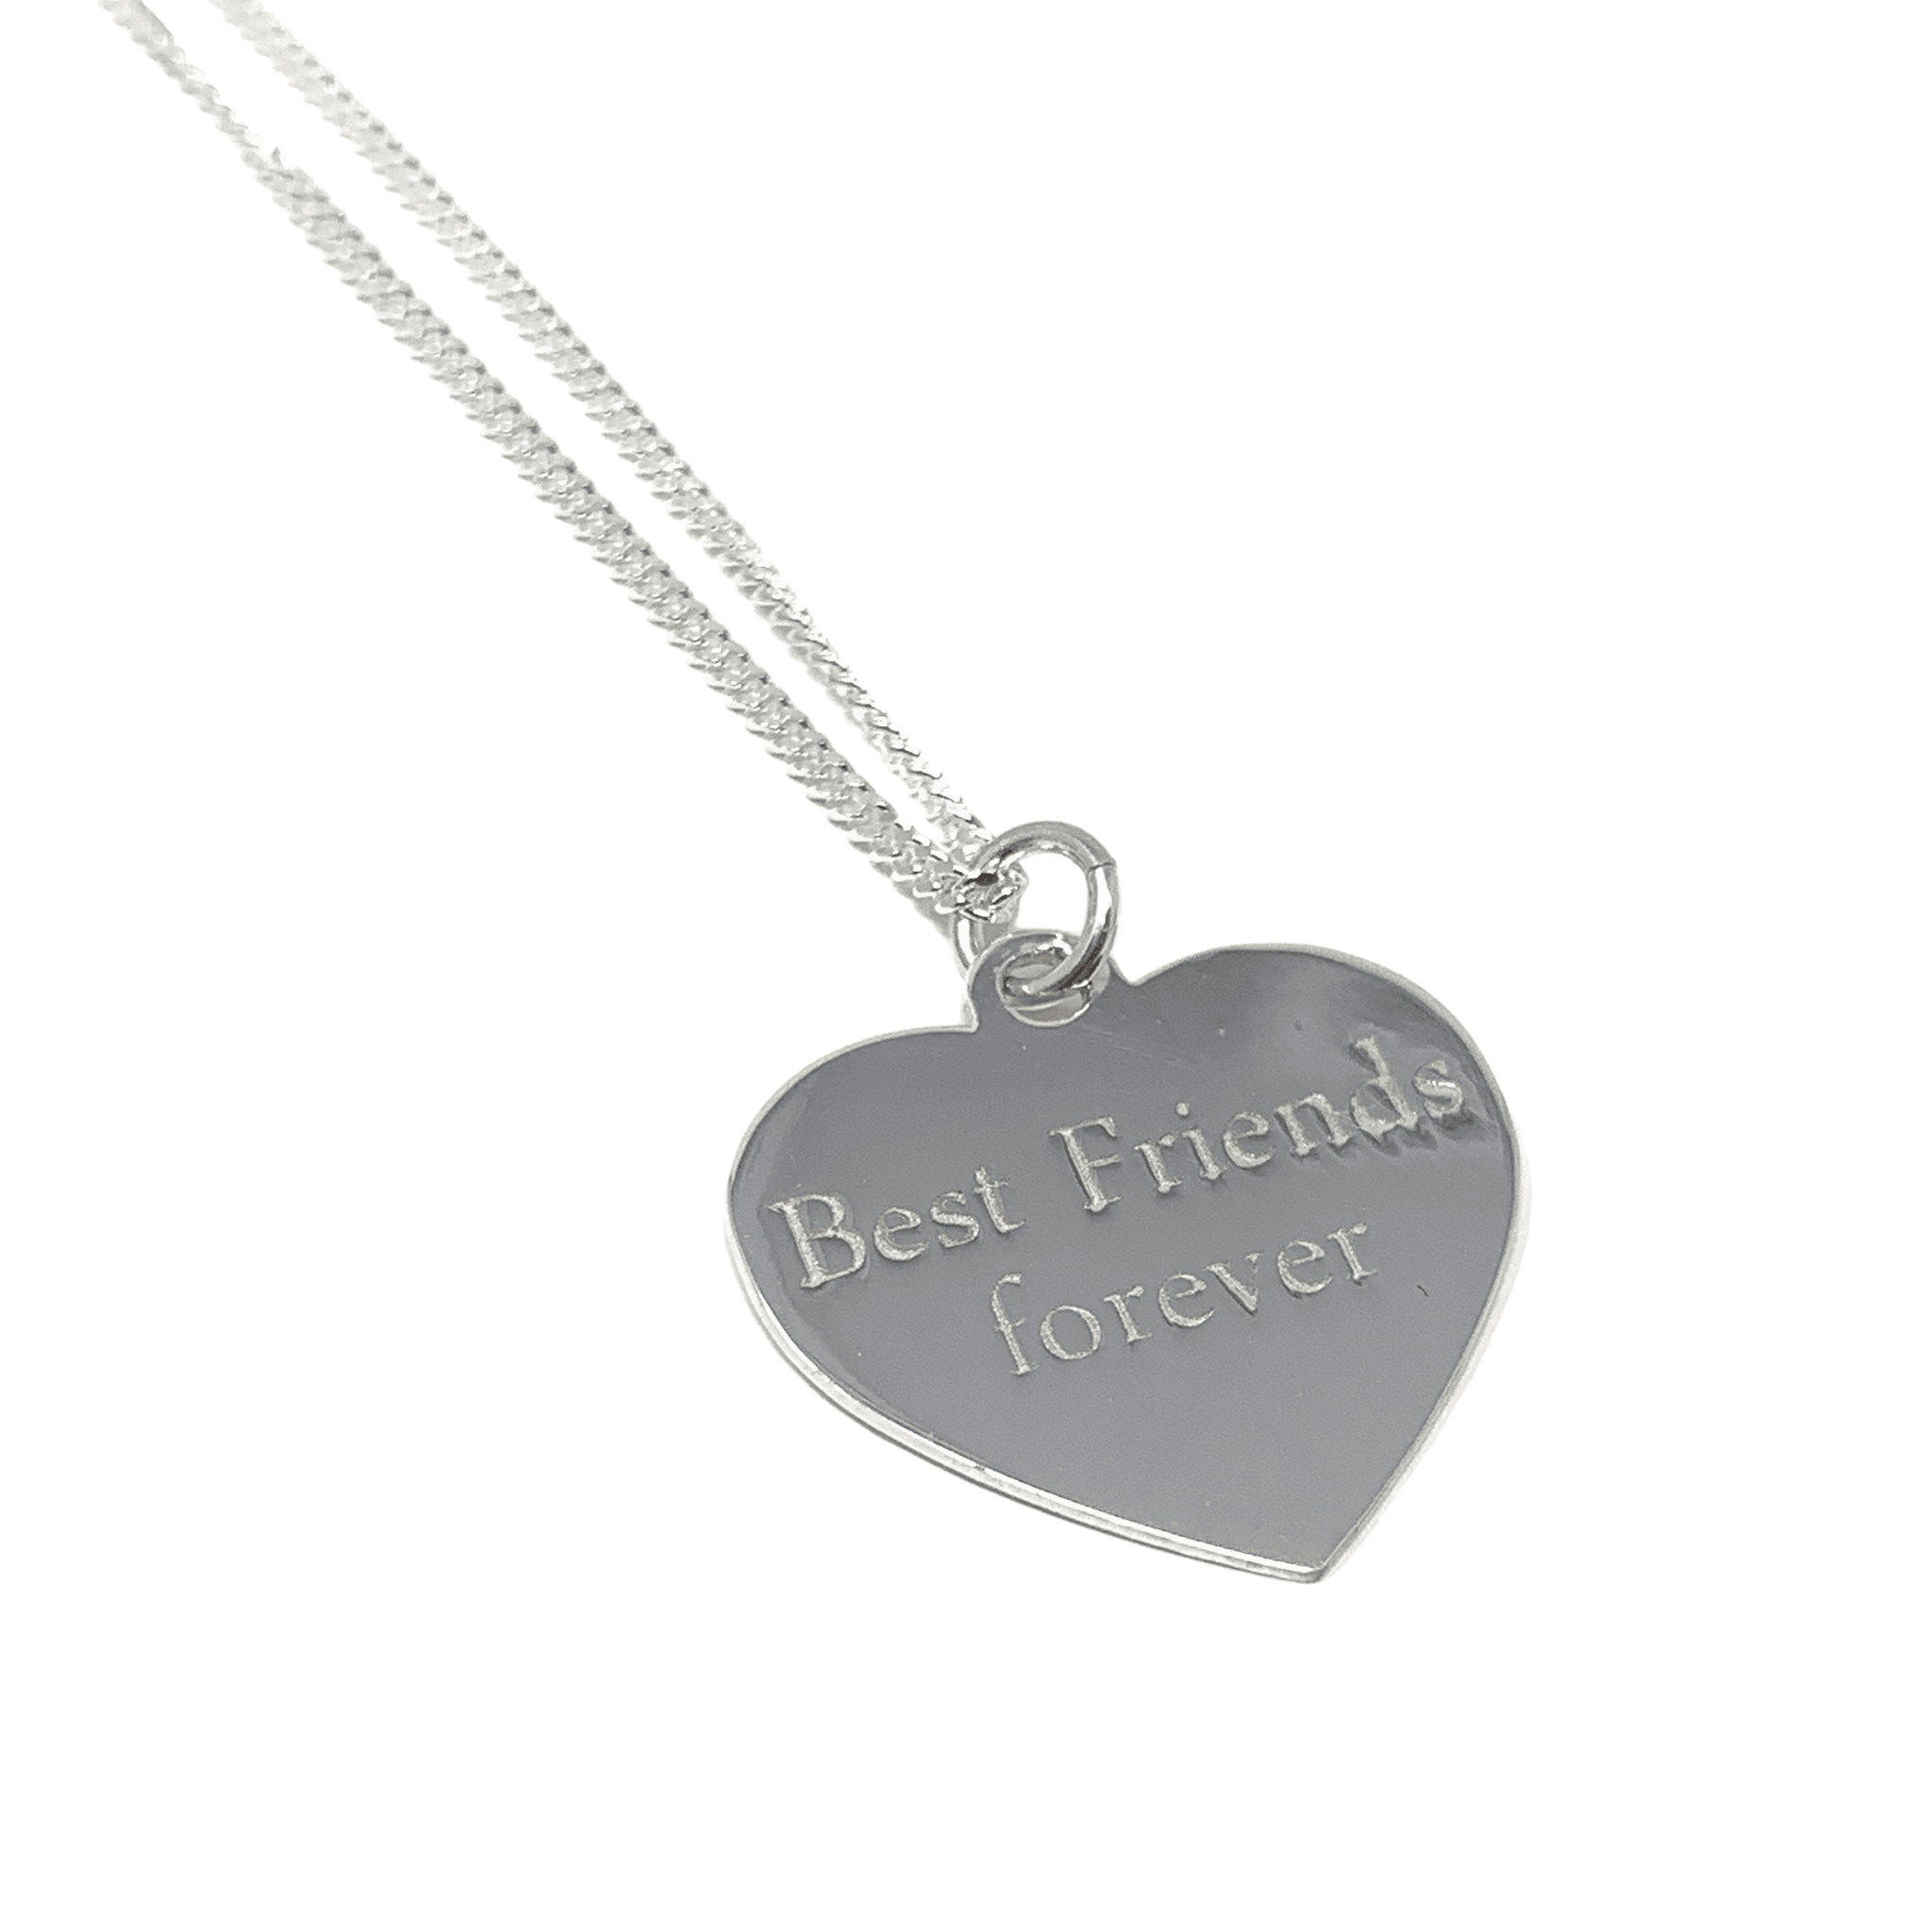 Mini Engraved Heart Token Necklace - Sterling Silver - SayItWithDiamonds.com